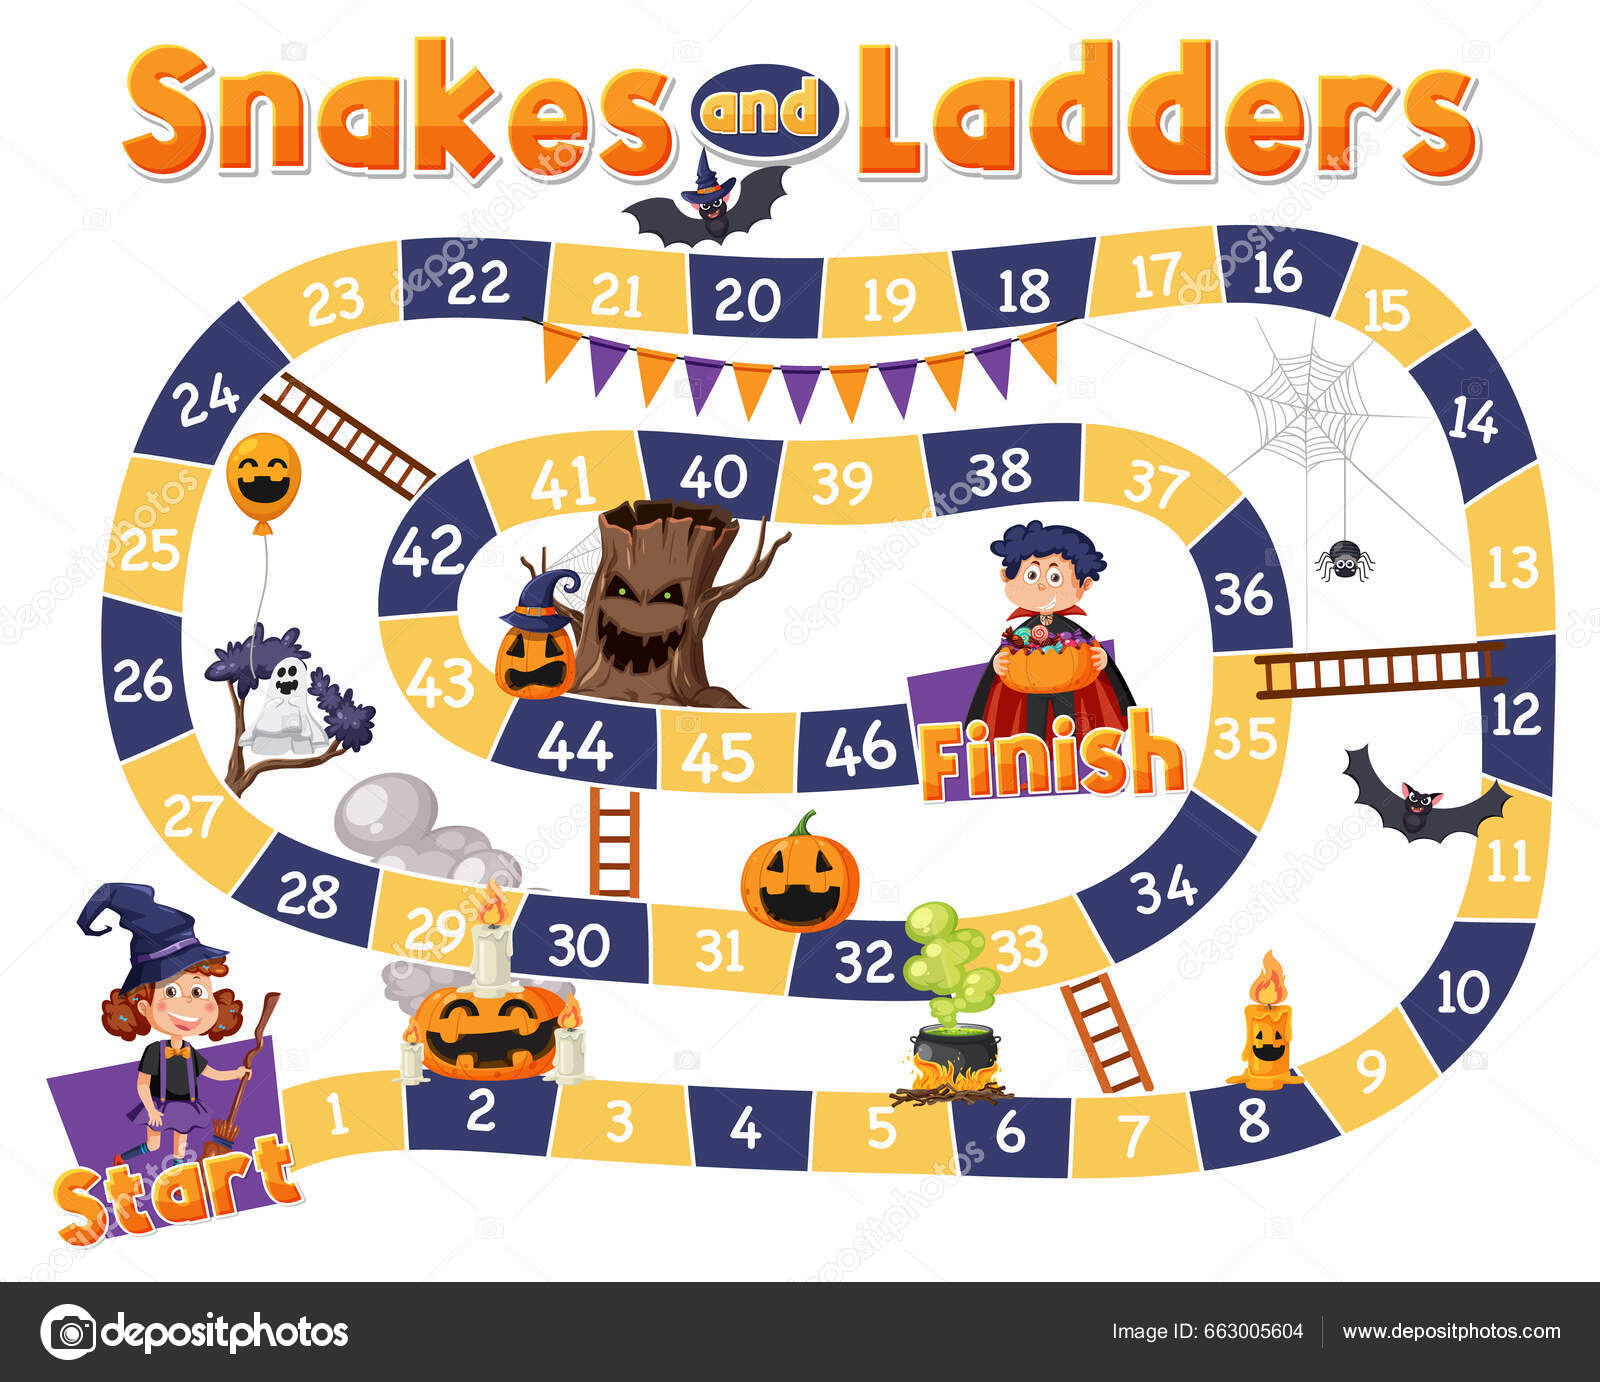 Snakes and Ladders - Play Snake and Ladder game by Hirankaisorn Pumpook